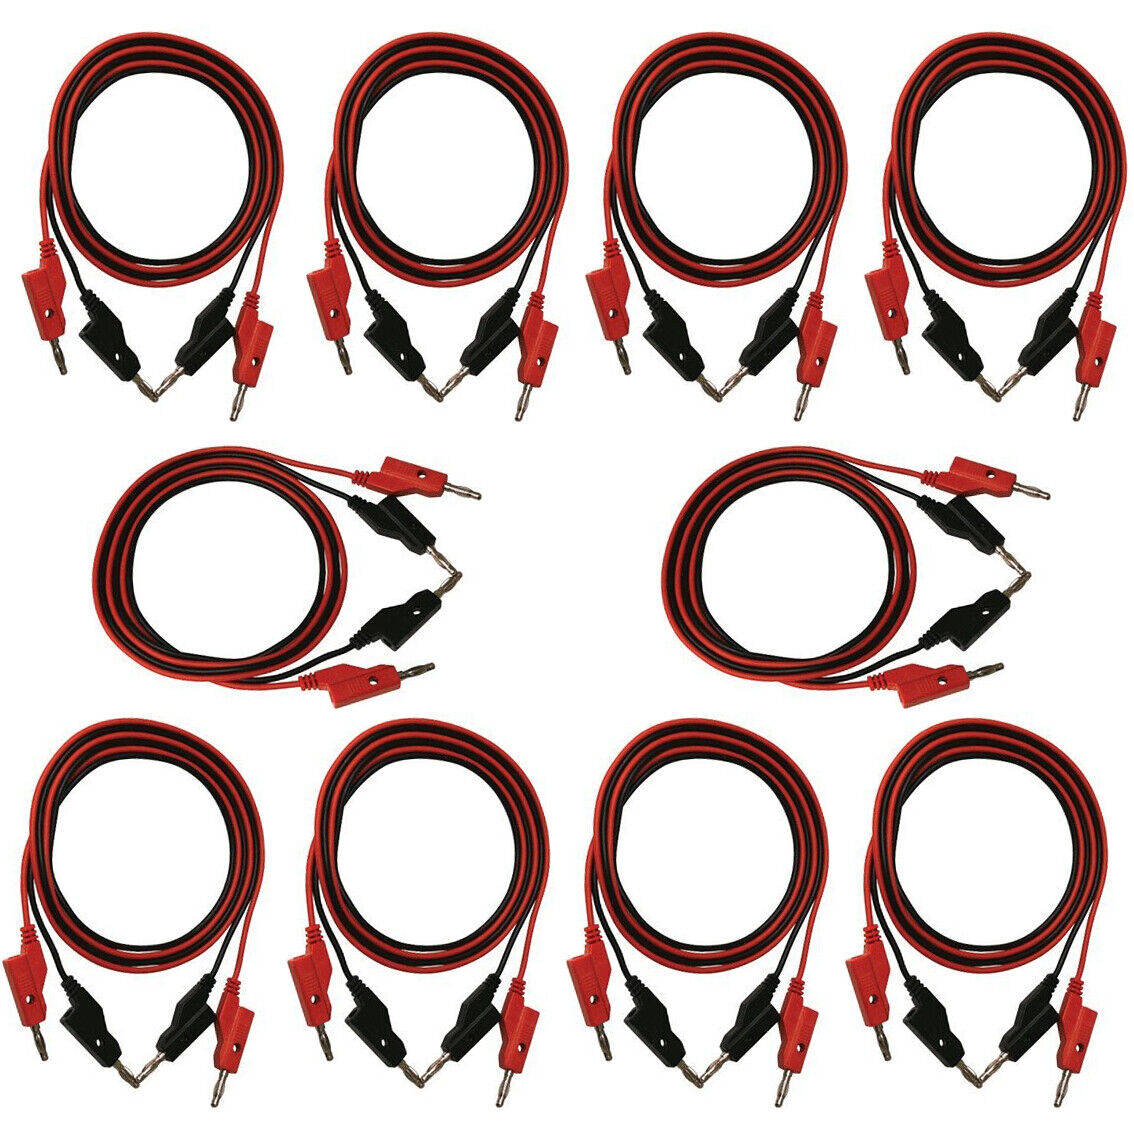 10 Pack of Red and Black Banana to Banana Test Lead Sets - 18 Gauge, 36\